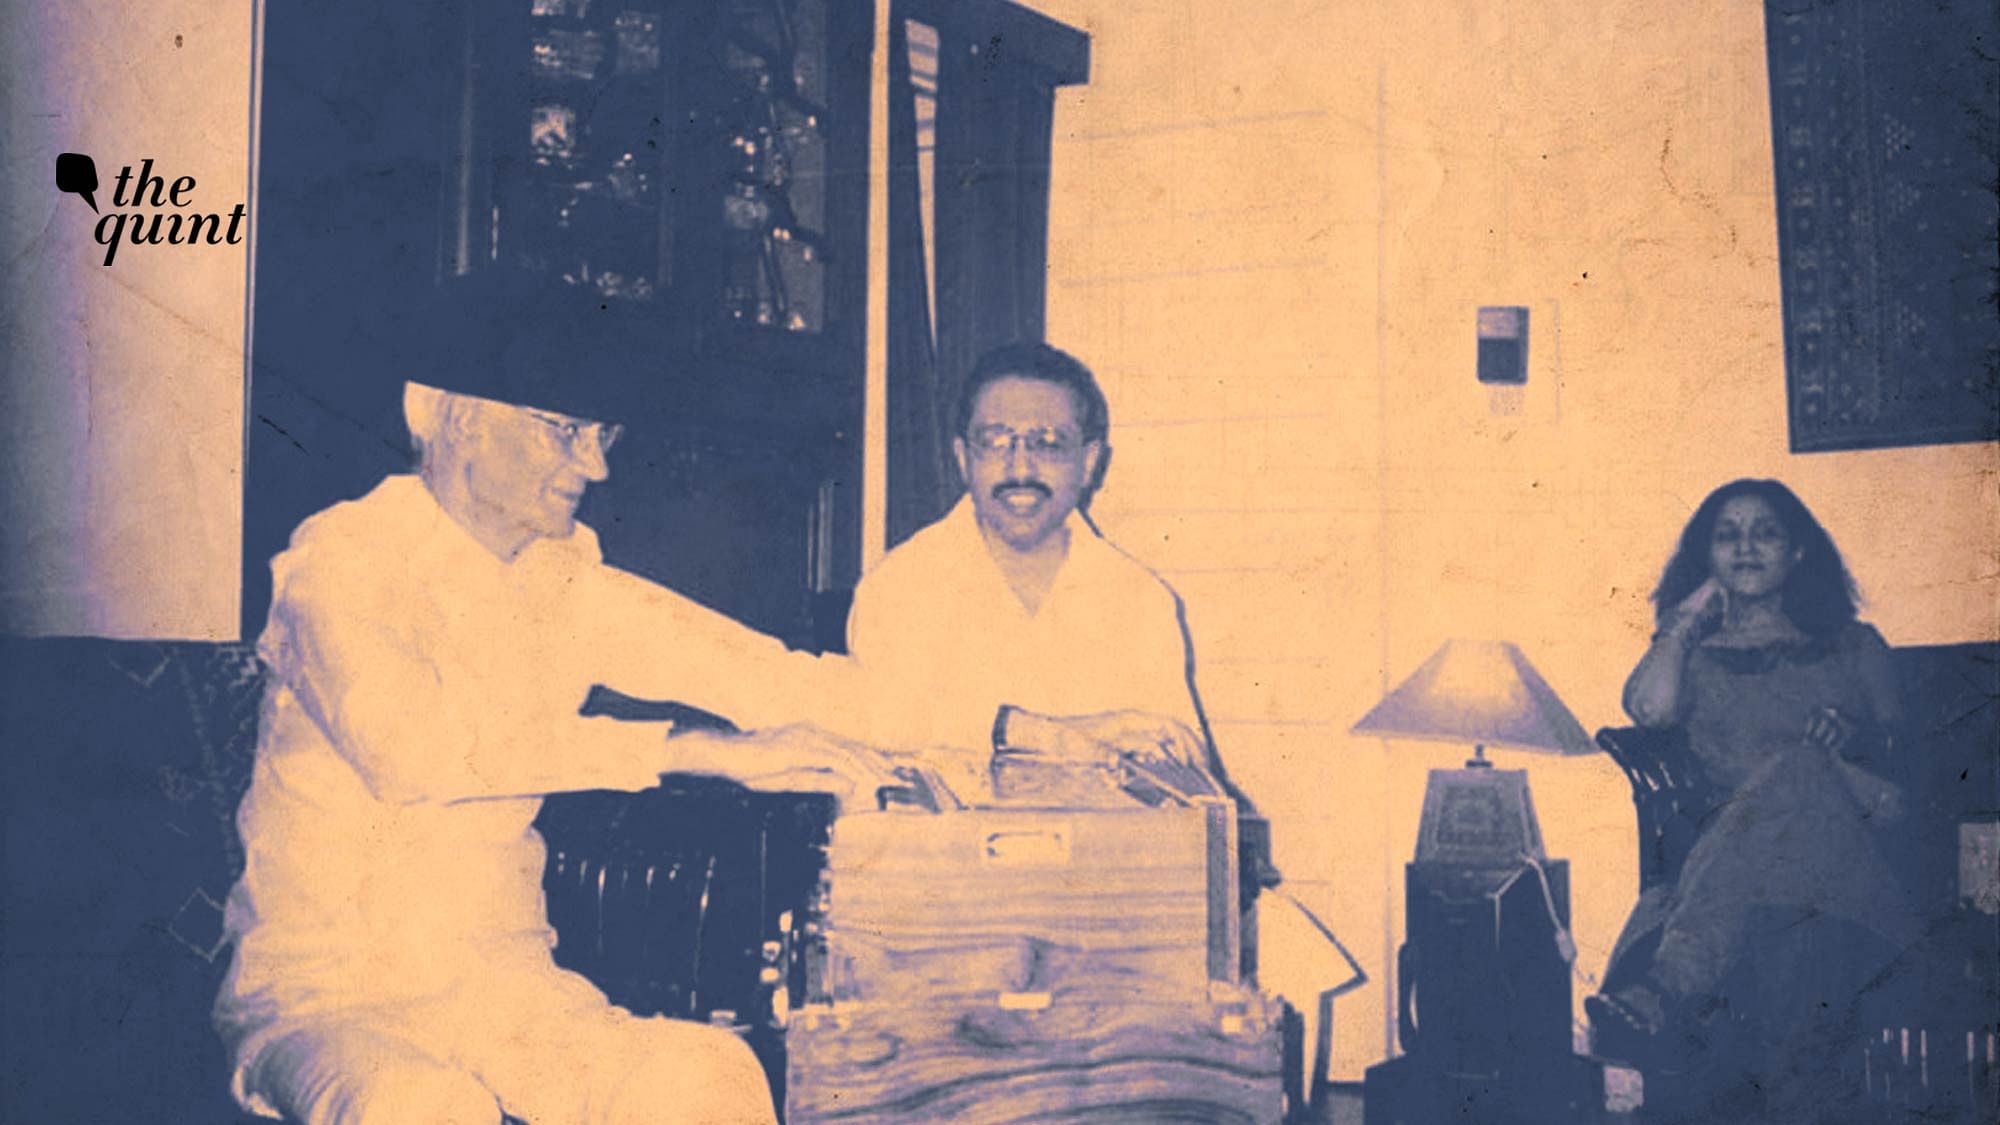 Image of music legend OP Nayyar (L), at Ajay Mankotia’s (the author) home, used for representational purposes.